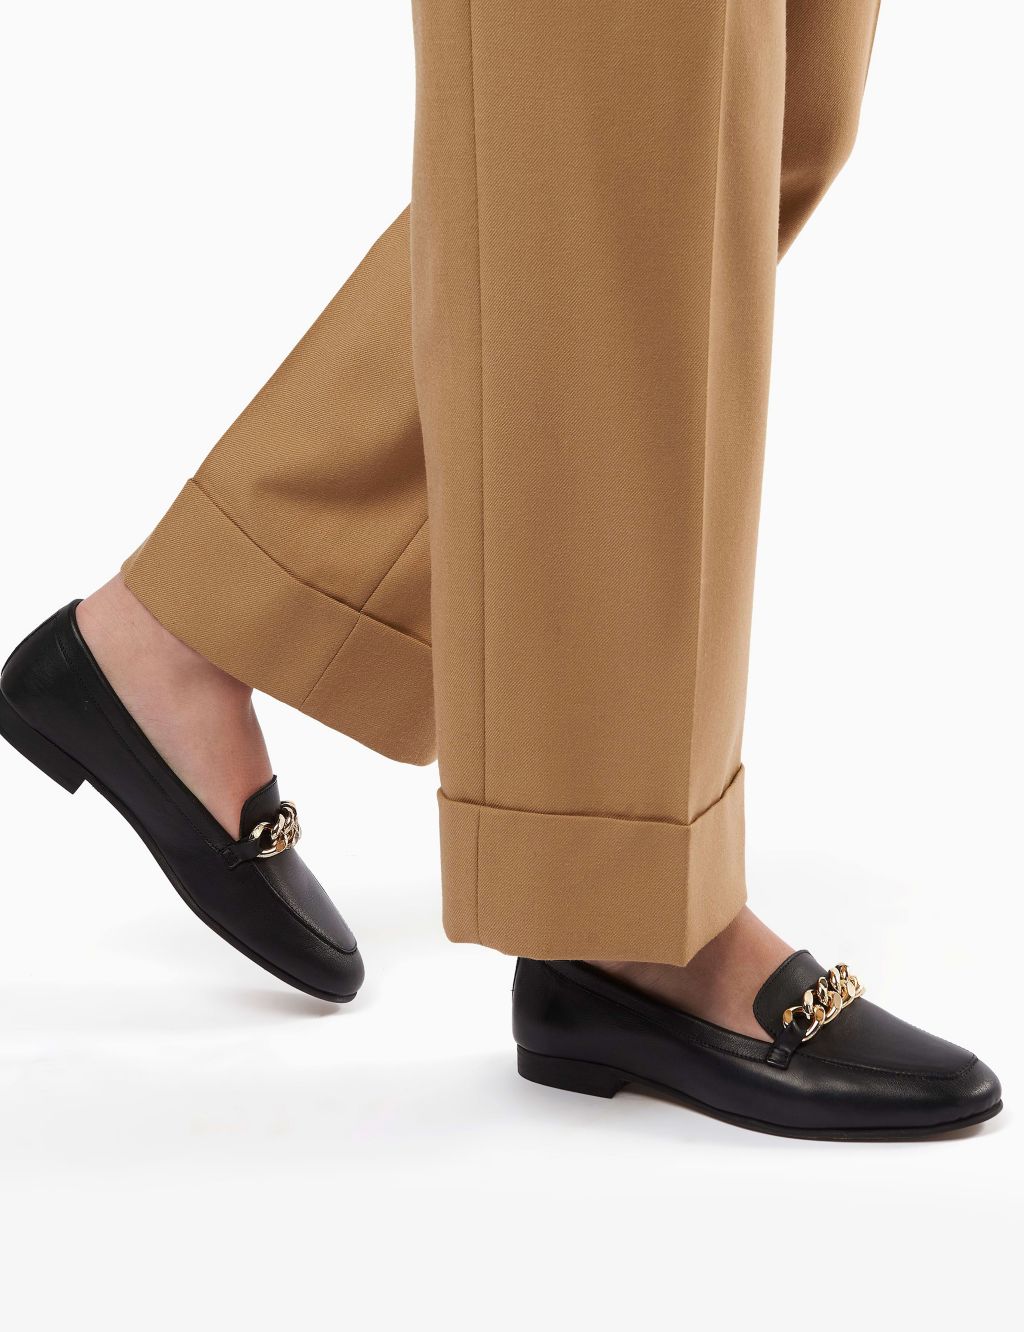 Leather Chain Detail Flat Loafers image 1